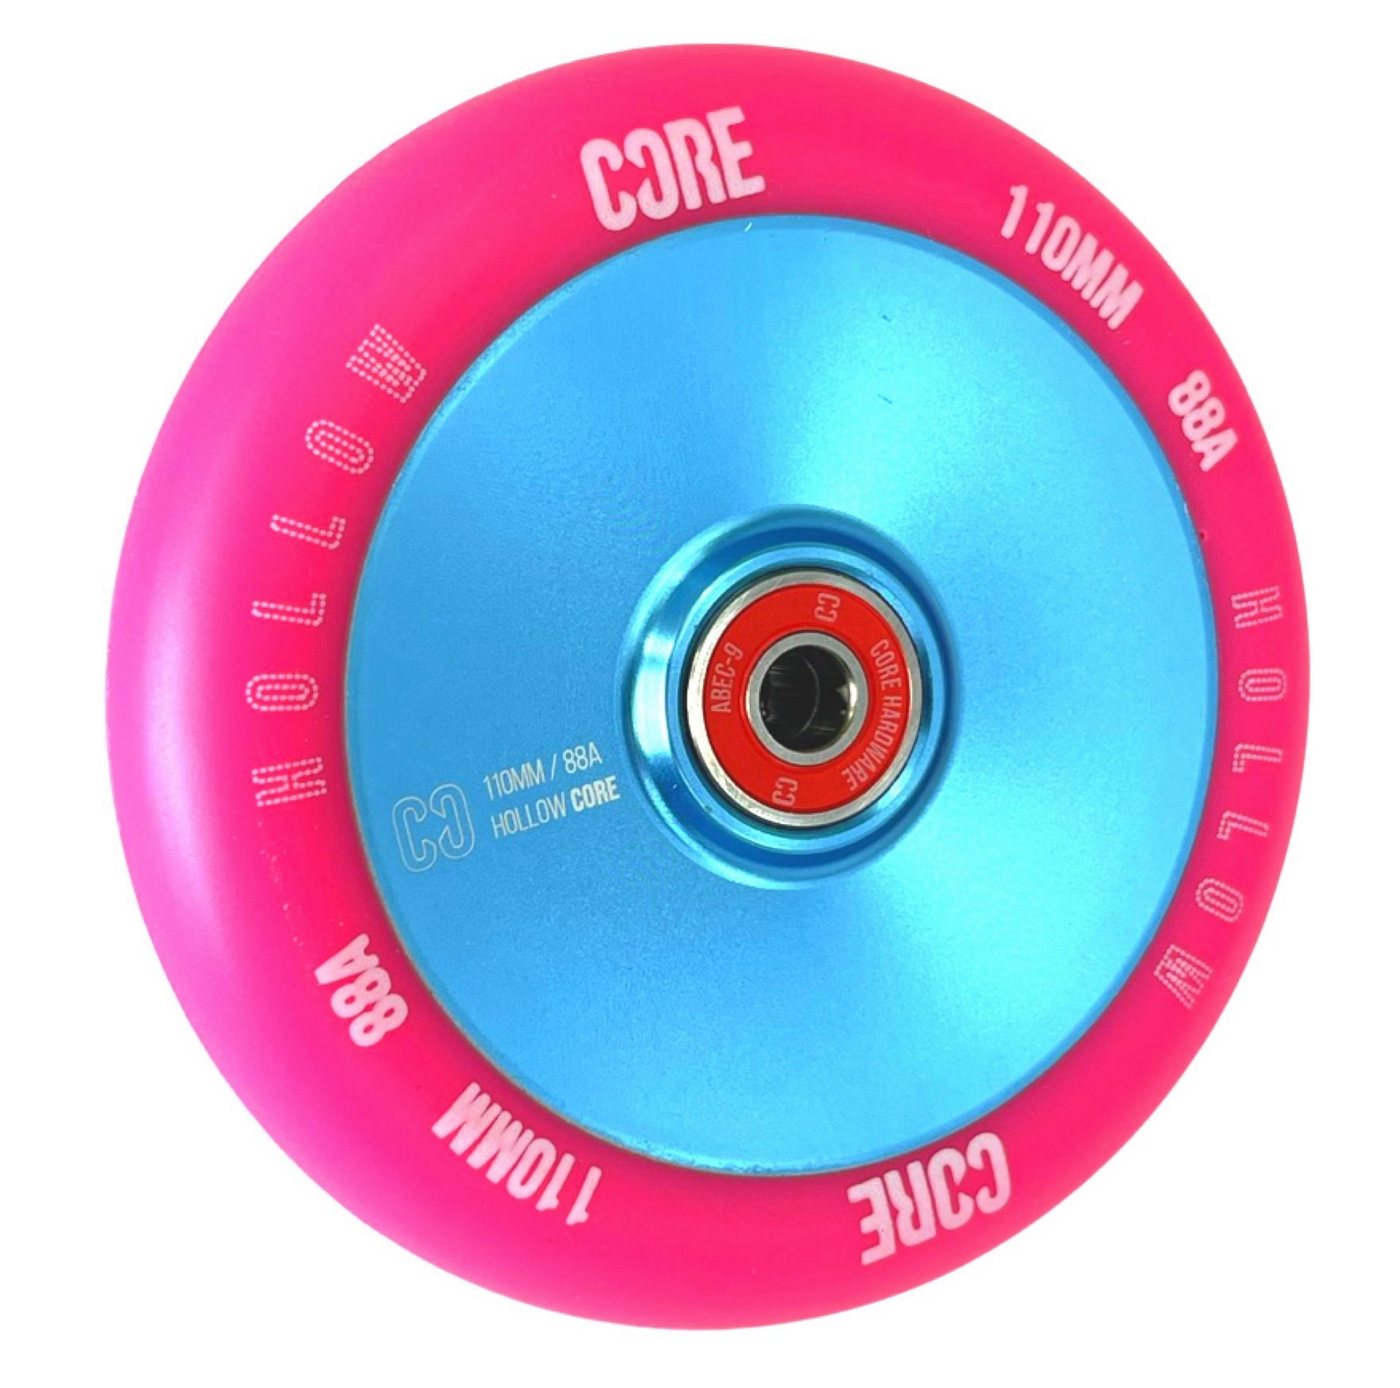 Core Action Sports Stuntscooter Core Hollow V2 Stunt-Scooter Rolle 110mm Hellblau/PU Pink von Core Action Sports